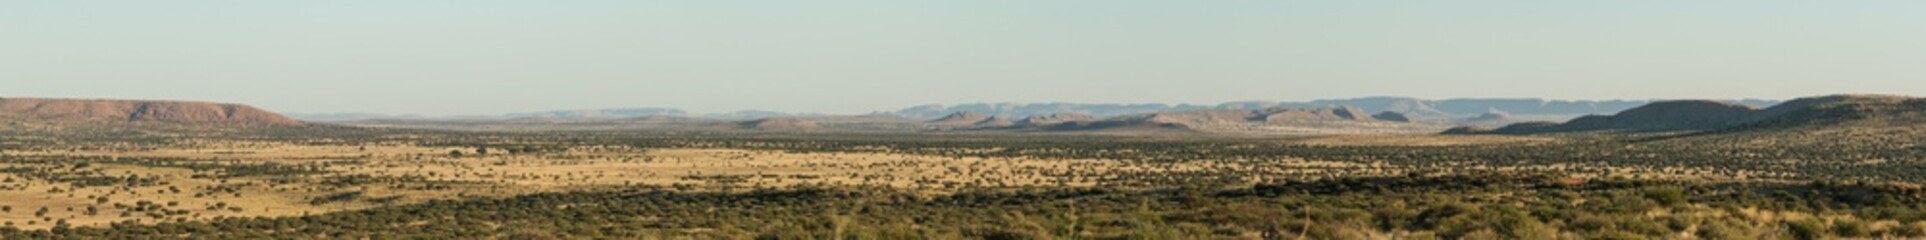 Wide angle landscape views of the scenic Kalahari region in the northern cape province of South Africa